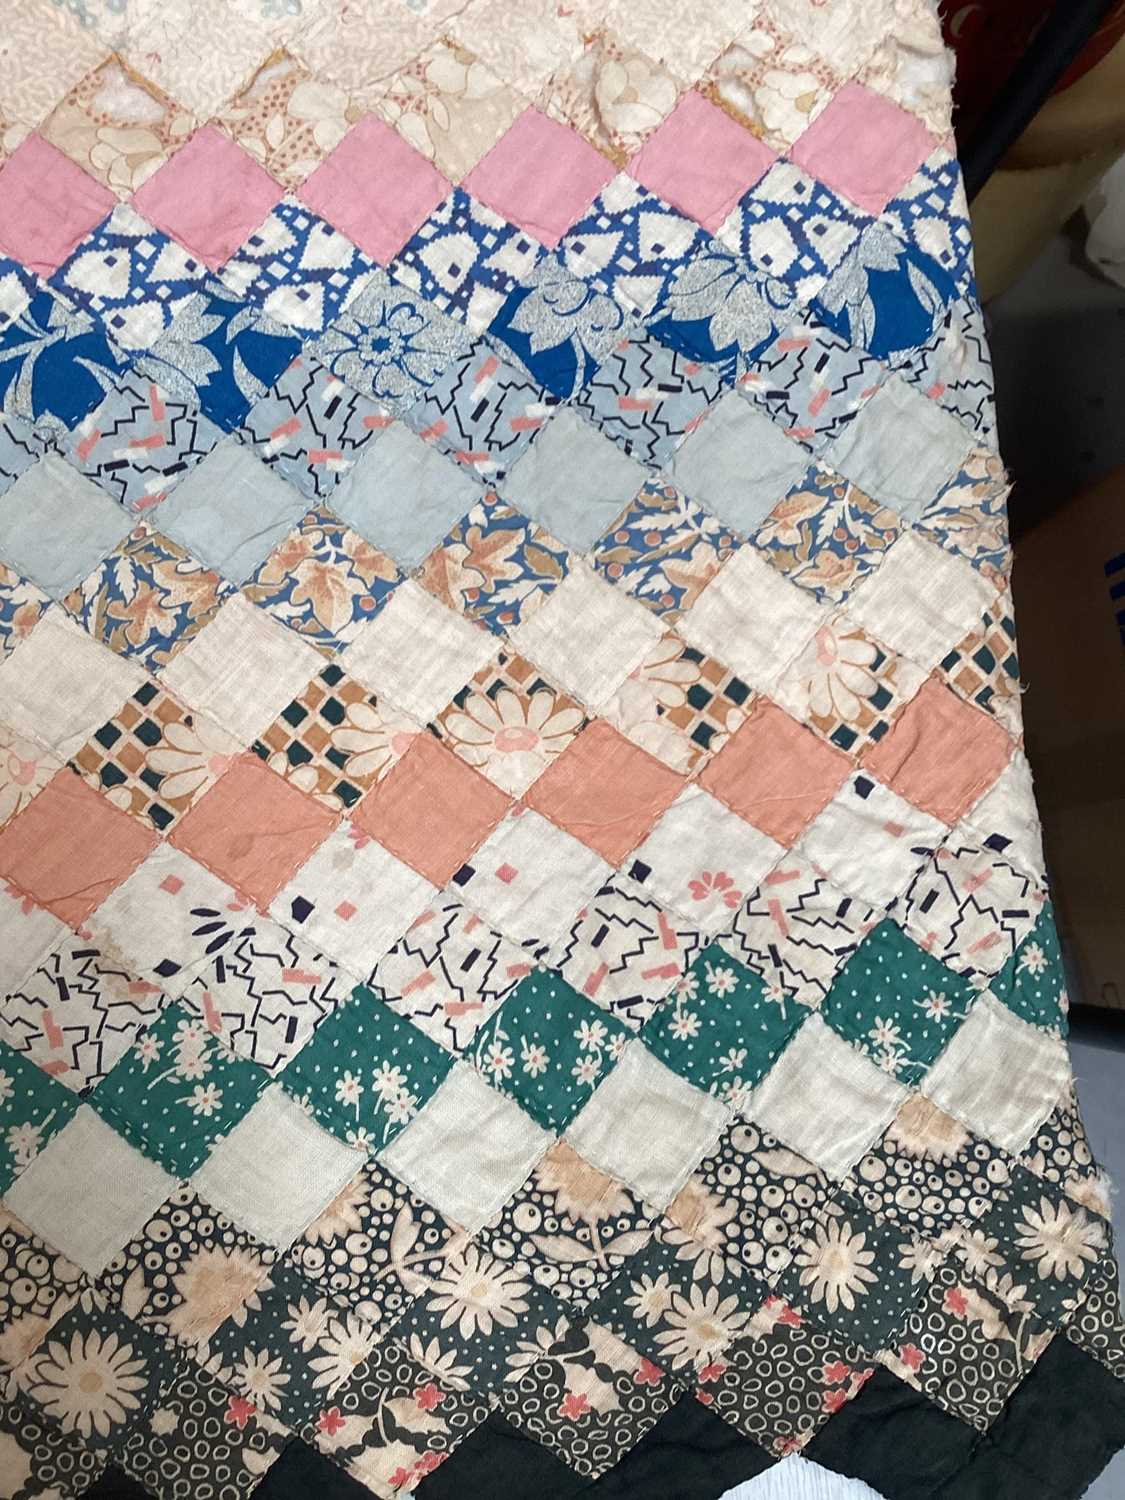 Cotton patchwork quilt 200 x 190 cms approximately c.1930's. - Image 3 of 12